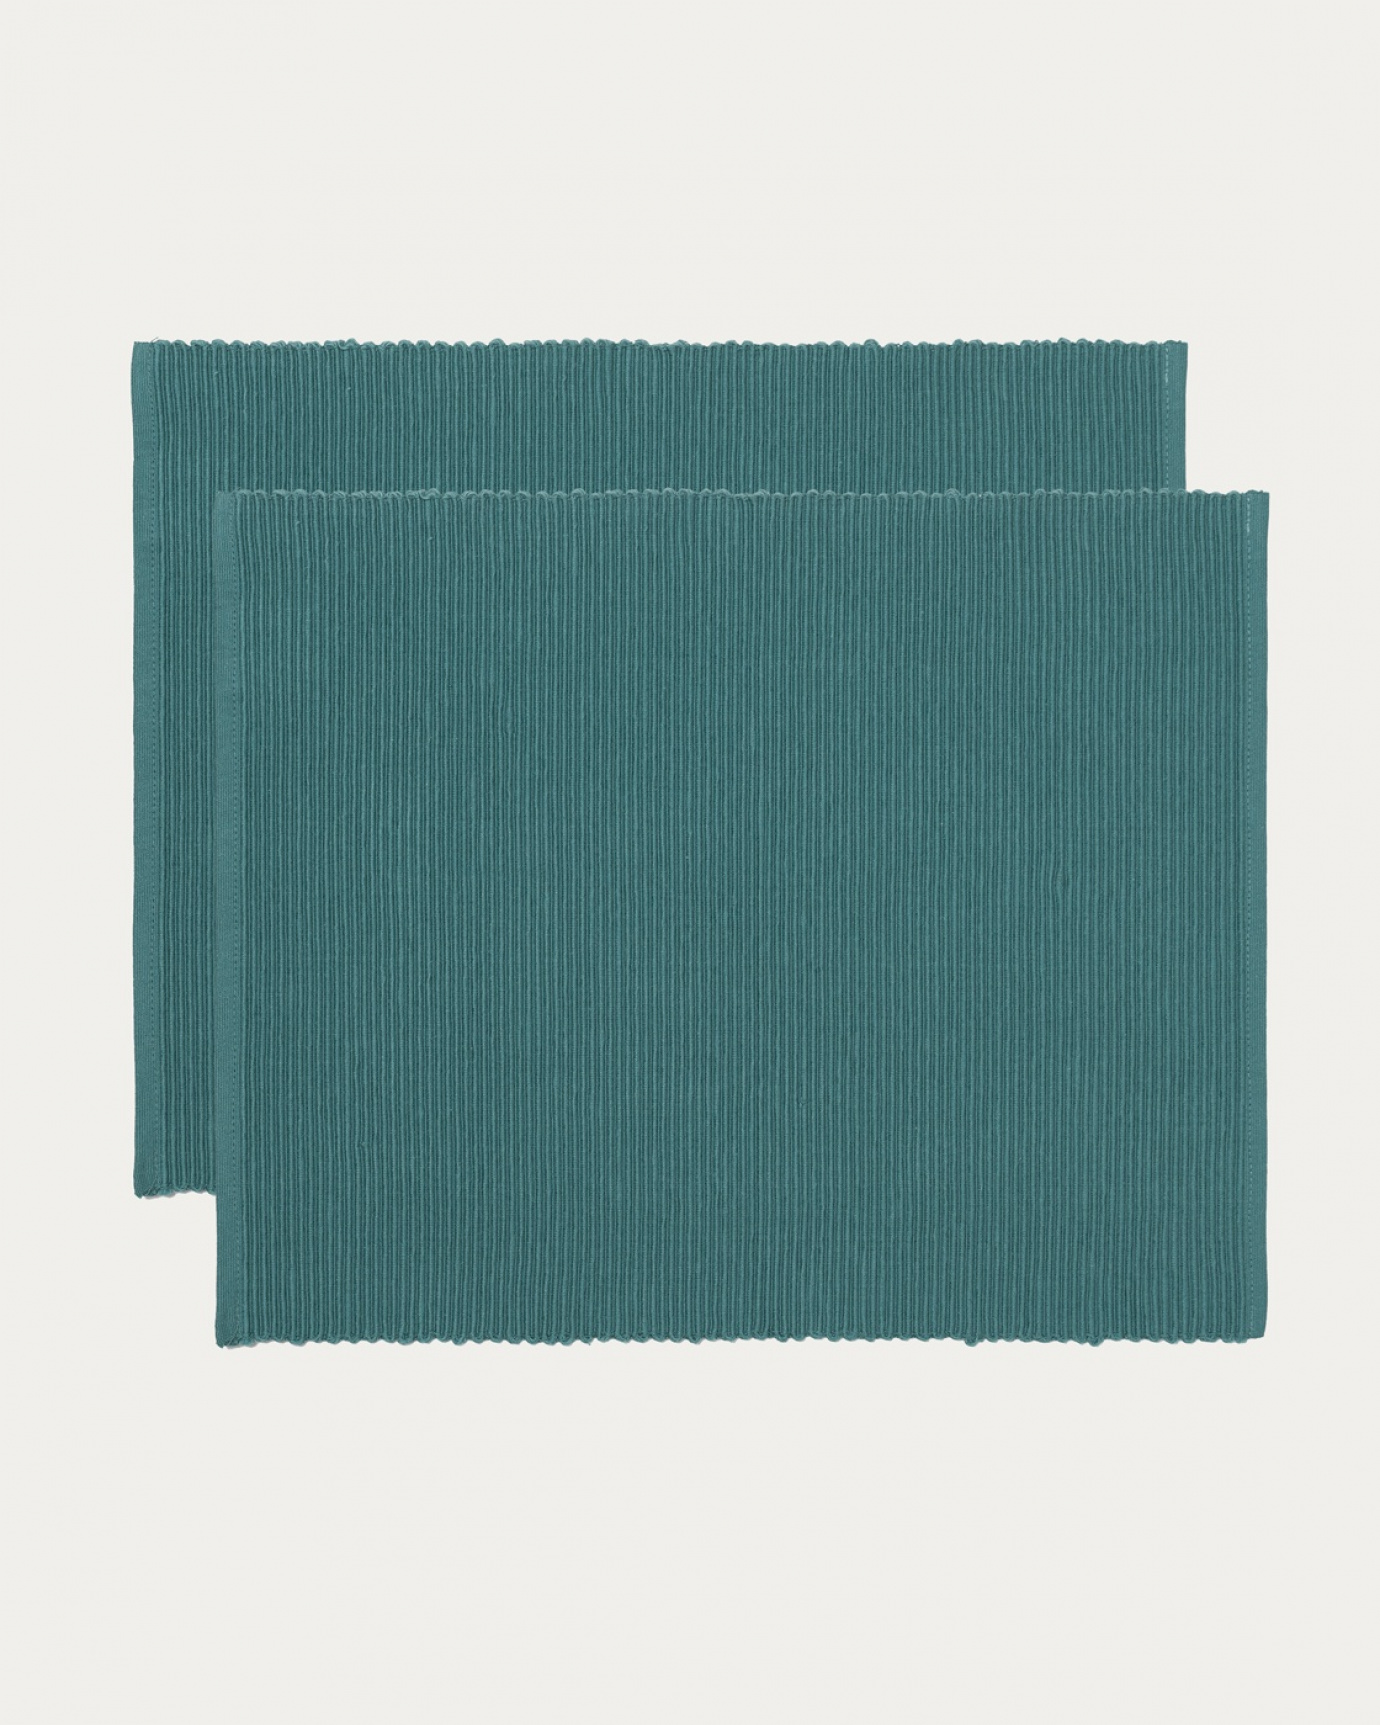 Product image dark grey turquoise UNI placemat made of soft cotton in ribbed quality from LINUM DESIGN. Size 35x46 cm and sold in 2-pack.